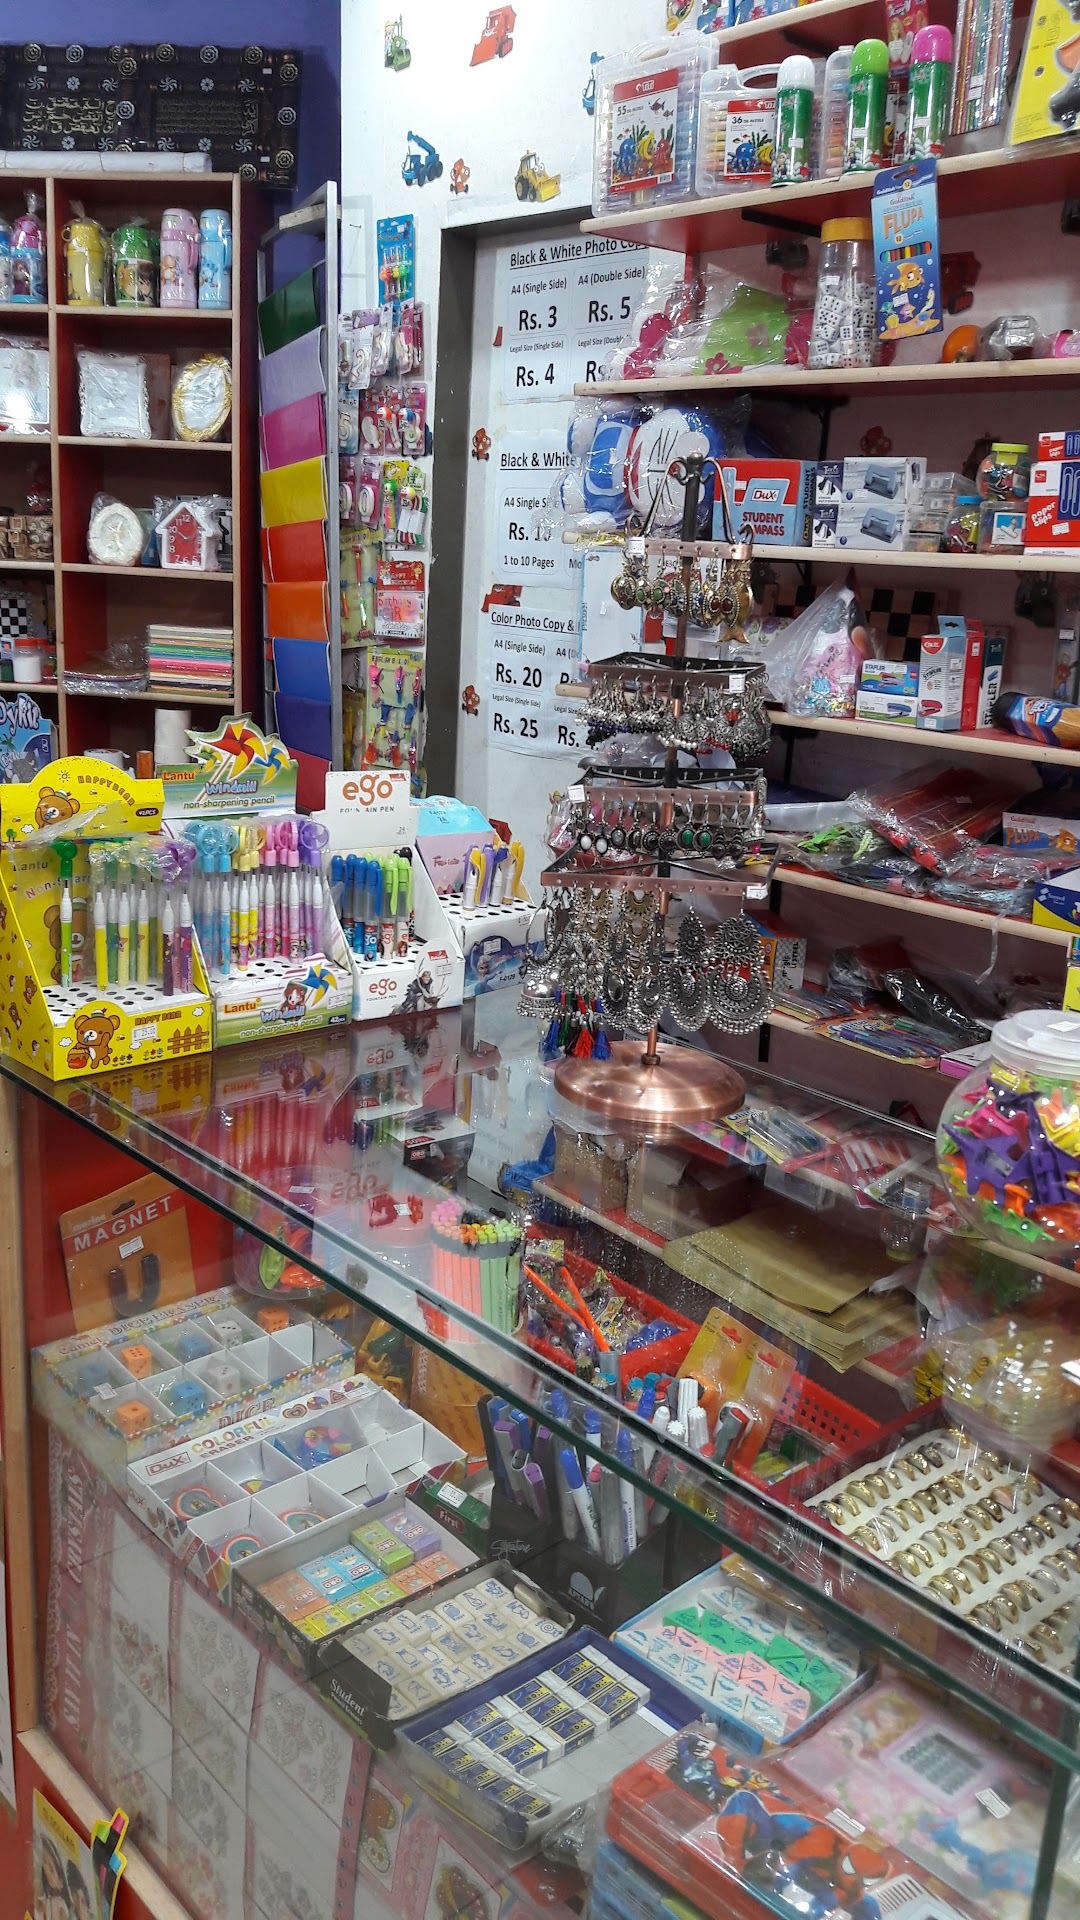 Syed & Sons Stationary Photocopy Printing and Book Shop